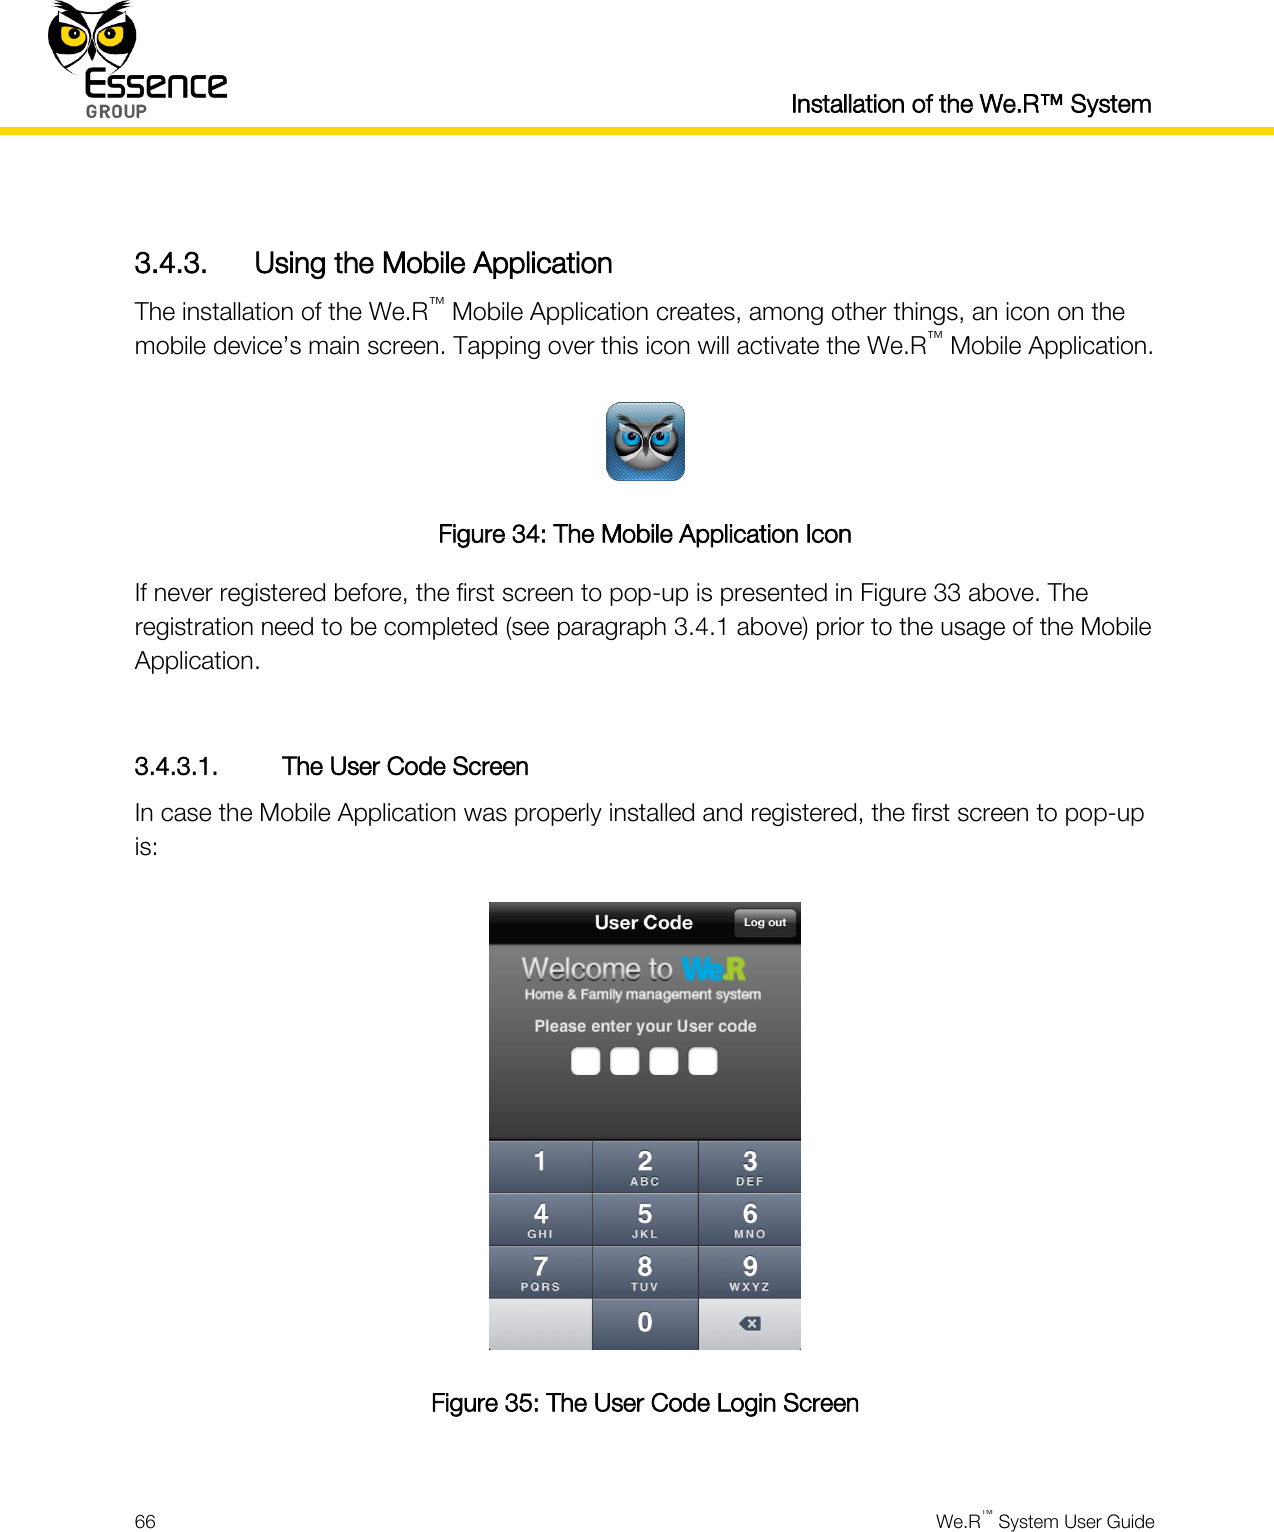  Installation of the We.R™ System  66  We.R™ System User Guide   3.4.3. Using the Mobile Application The installation of the We.R™ Mobile Application creates, among other things, an icon on the mobile device’s main screen. Tapping over this icon will activate the We.R™ Mobile Application.  Figure 34: The Mobile Application Icon If never registered before, the first screen to pop-up is presented in Figure 33 above. The registration need to be completed (see paragraph 3.4.1 above) prior to the usage of the Mobile Application.  3.4.3.1. The User Code Screen In case the Mobile Application was properly installed and registered, the first screen to pop-up is:  Figure 35: The User Code Login Screen  